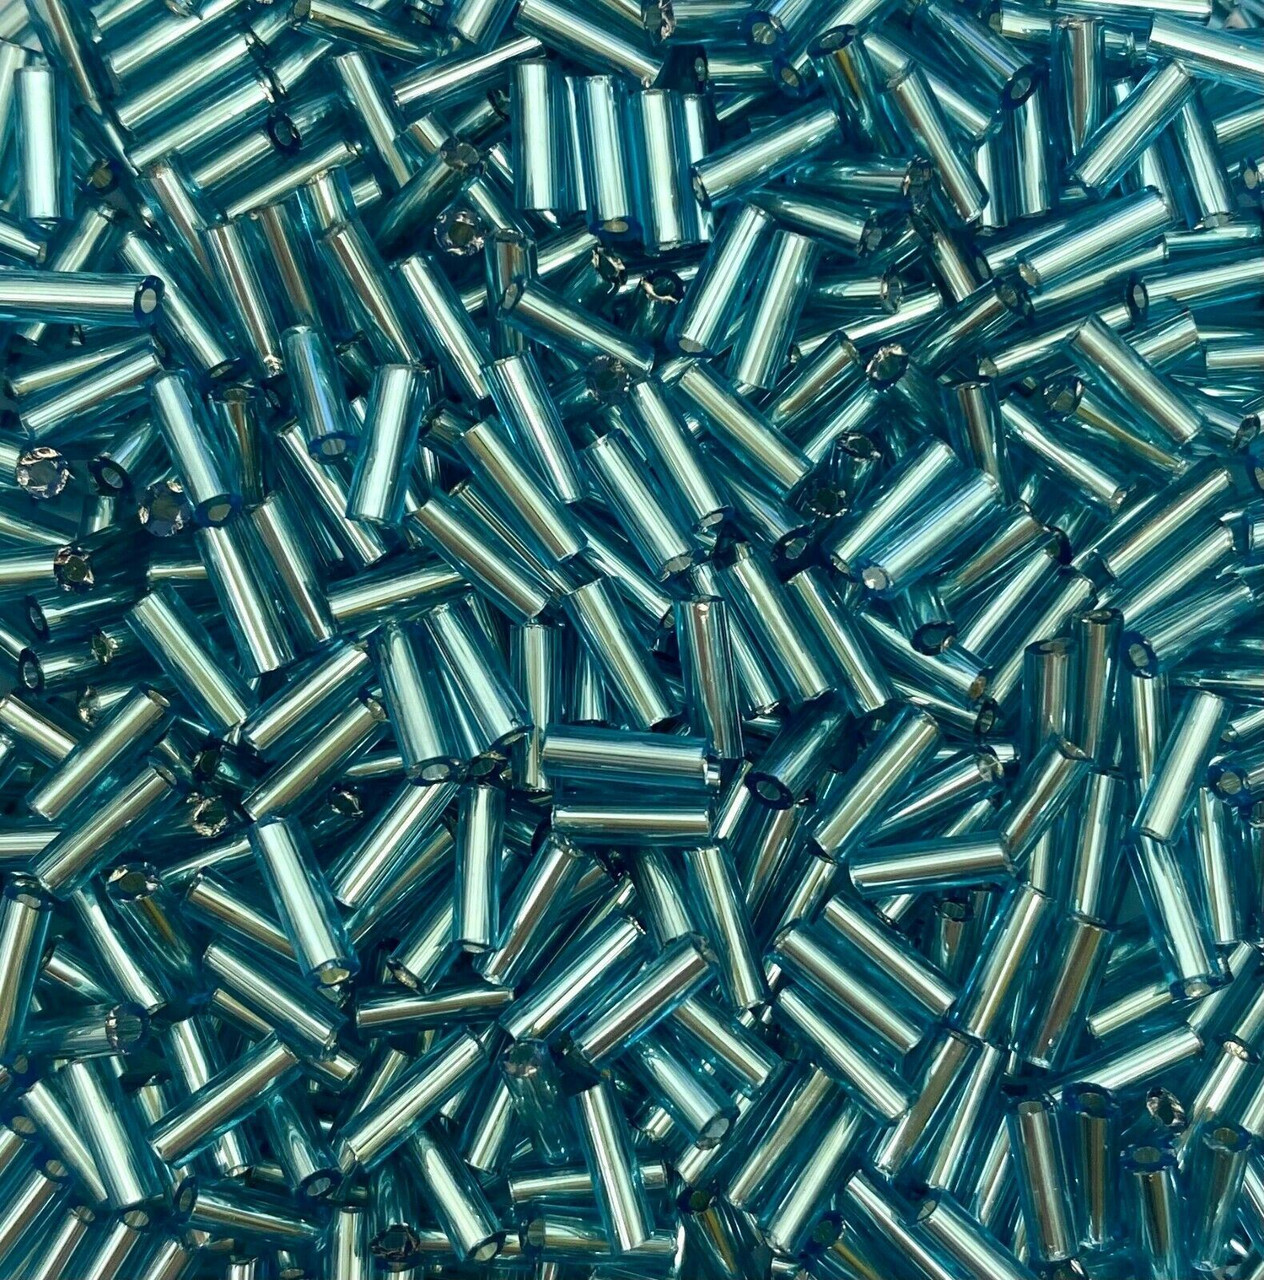 50g glass bugle beads - Aqua Silver-Lined - approx 6mm